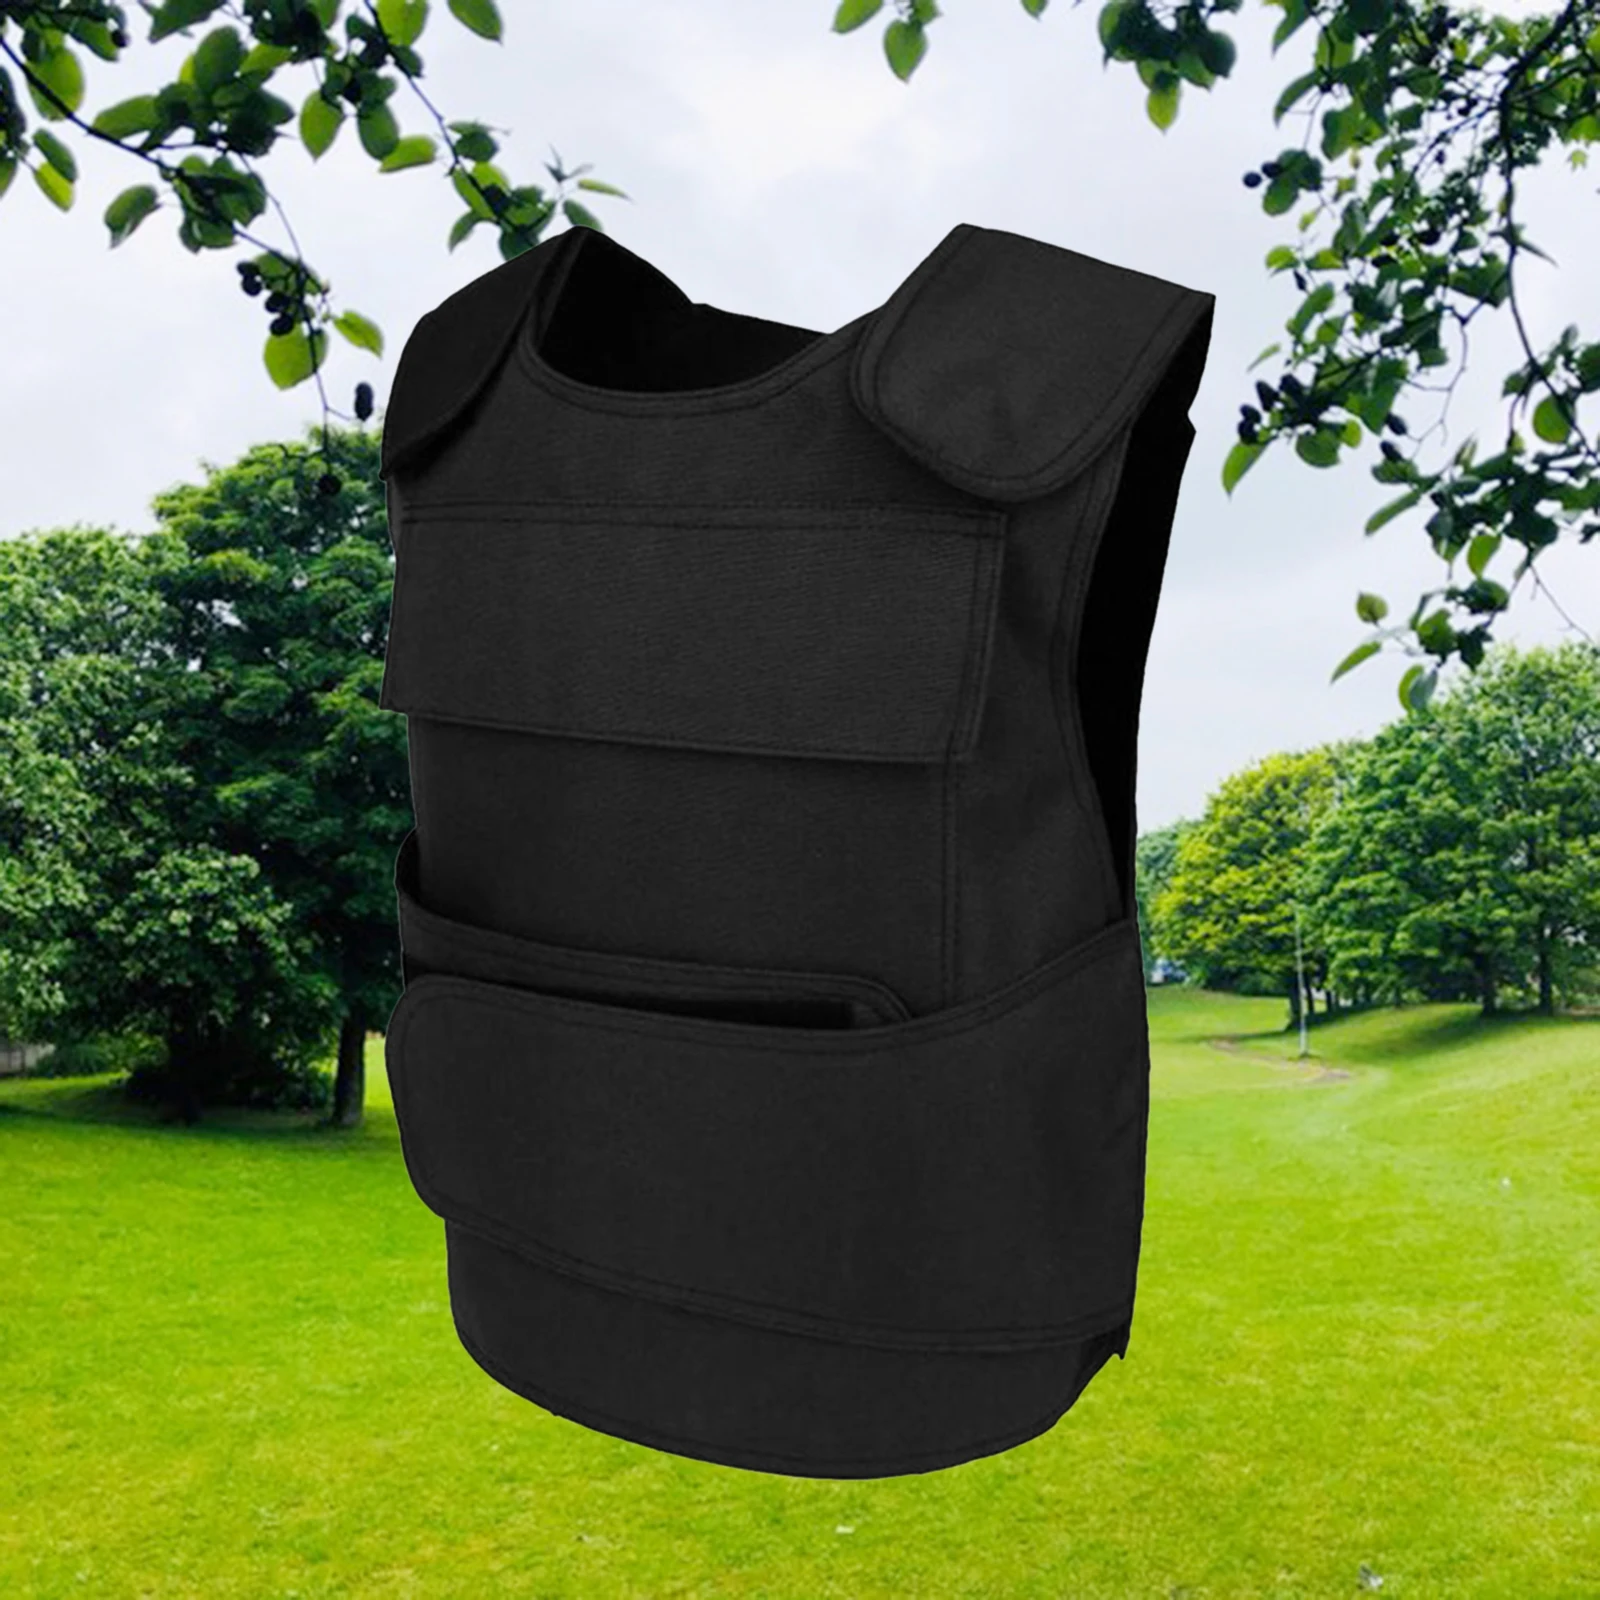 Tactical Vest Armored Vest Outdoor CS Game Paintball Shooting Air Gun Tactical  Military Equipment